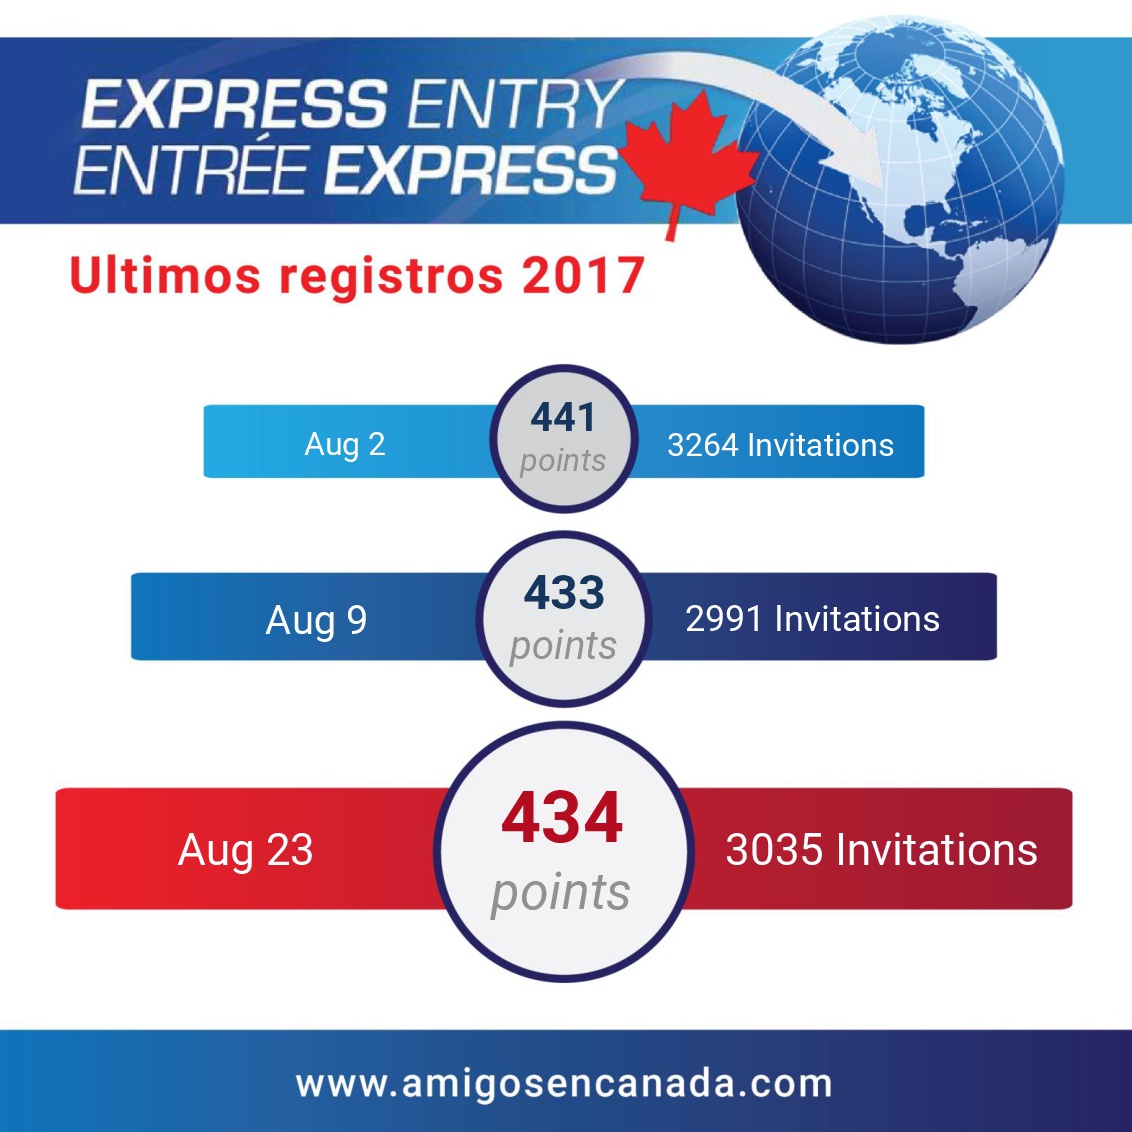 EXPRESS ENTRY Aug 23